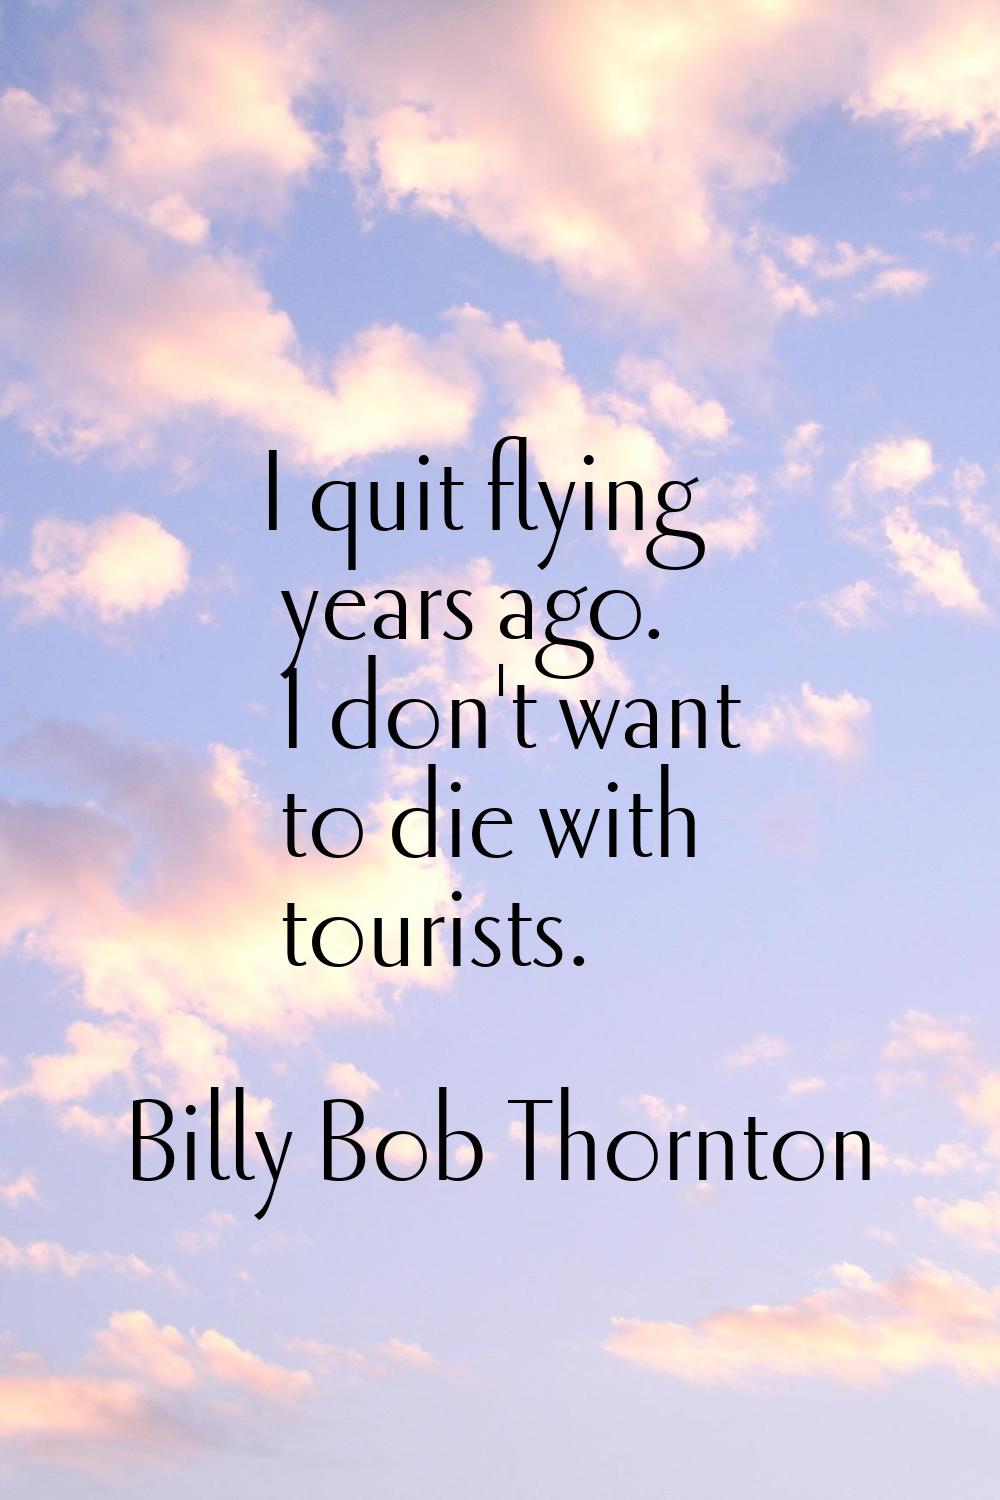 I quit flying years ago. I don't want to die with tourists.